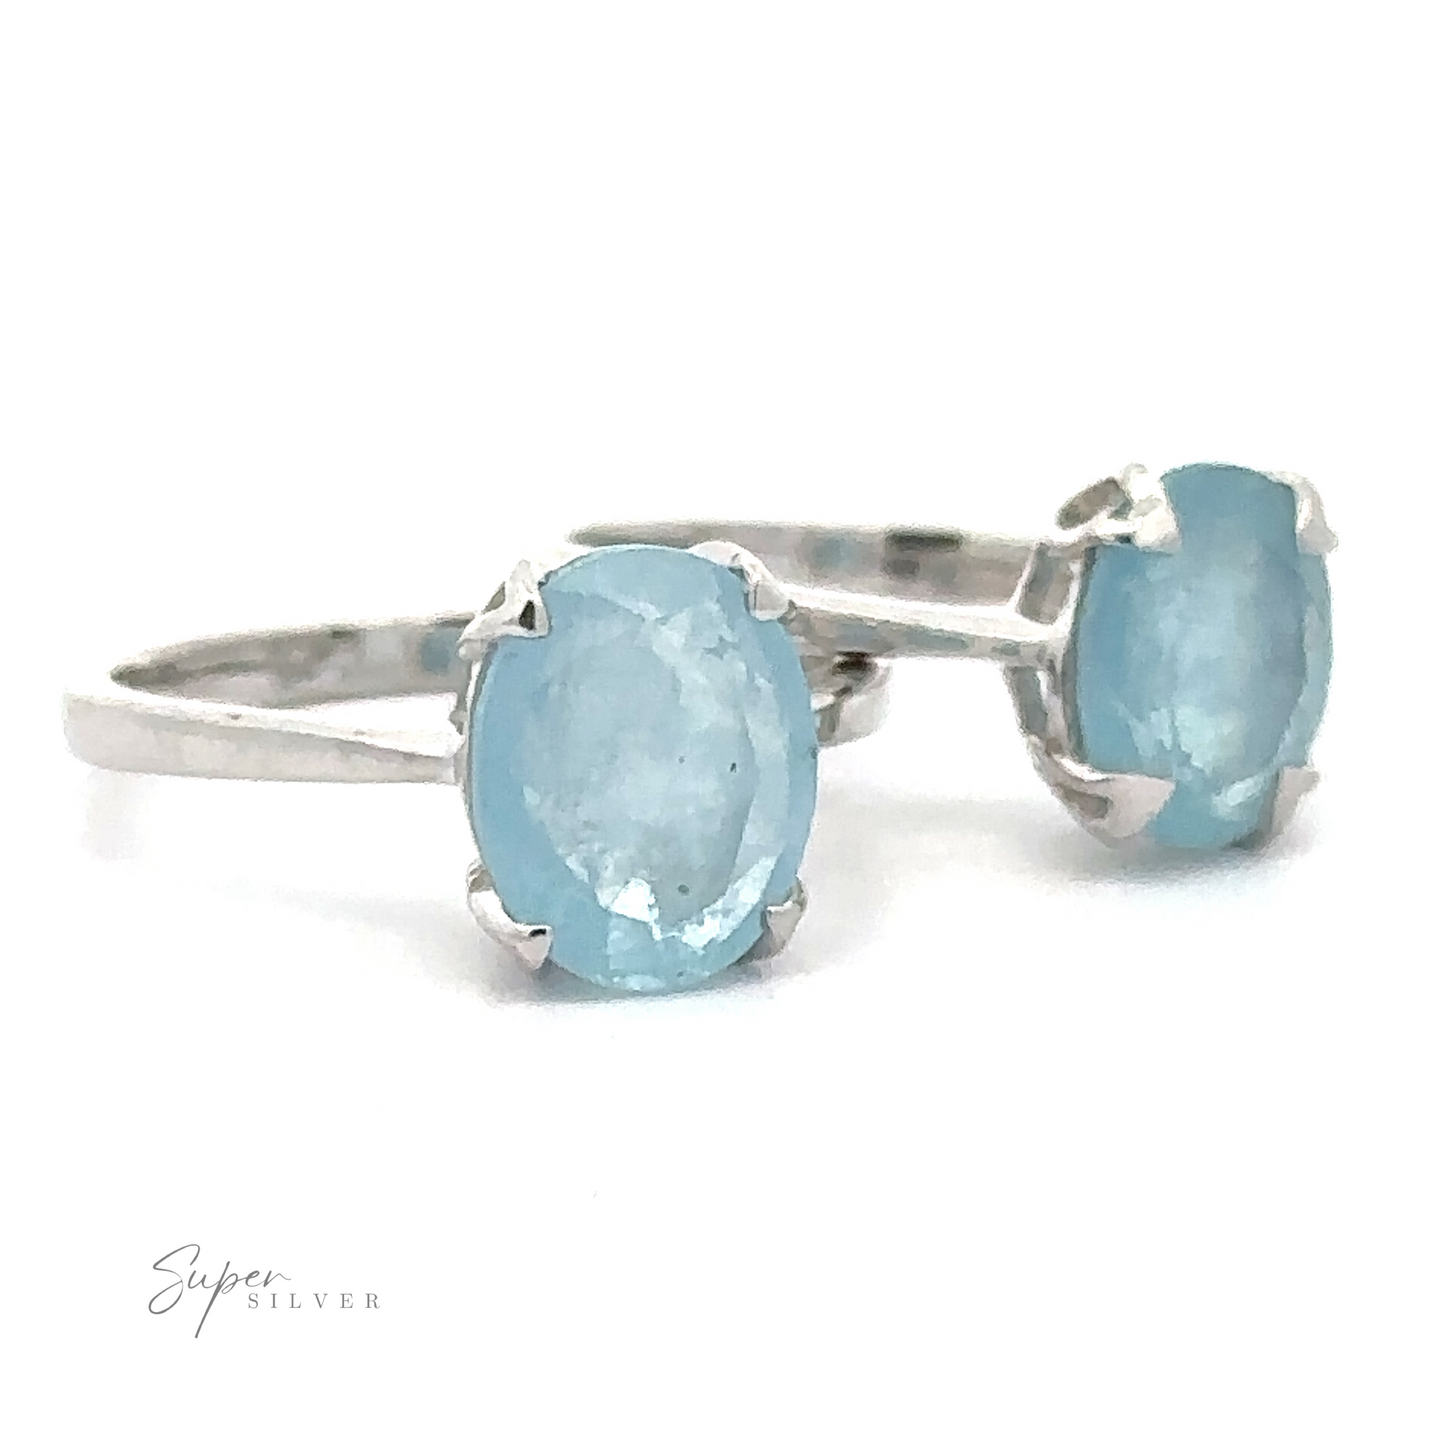 Aquamarine Ring with two light blue Aquamarine gemstones, displayed against a white background with a logo reading "Super Silver" in script.